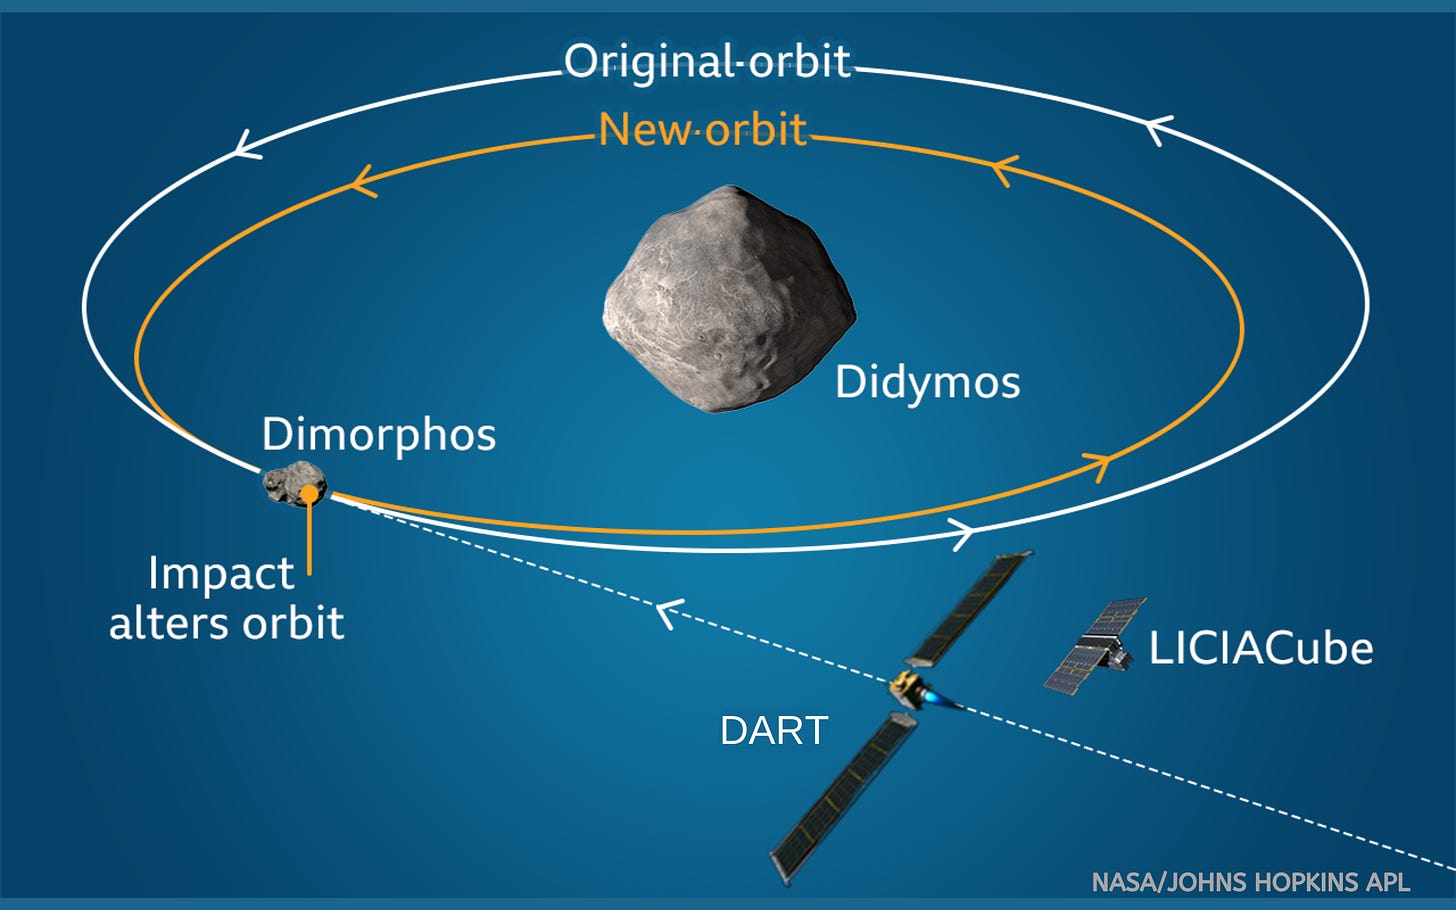 The original orbit of Dimorphos is marked by an ellipse around the larger asteroid Didymos. The impact alters the orbit, shrinking it—this is marked by a smaller ellipse around the asteroid.